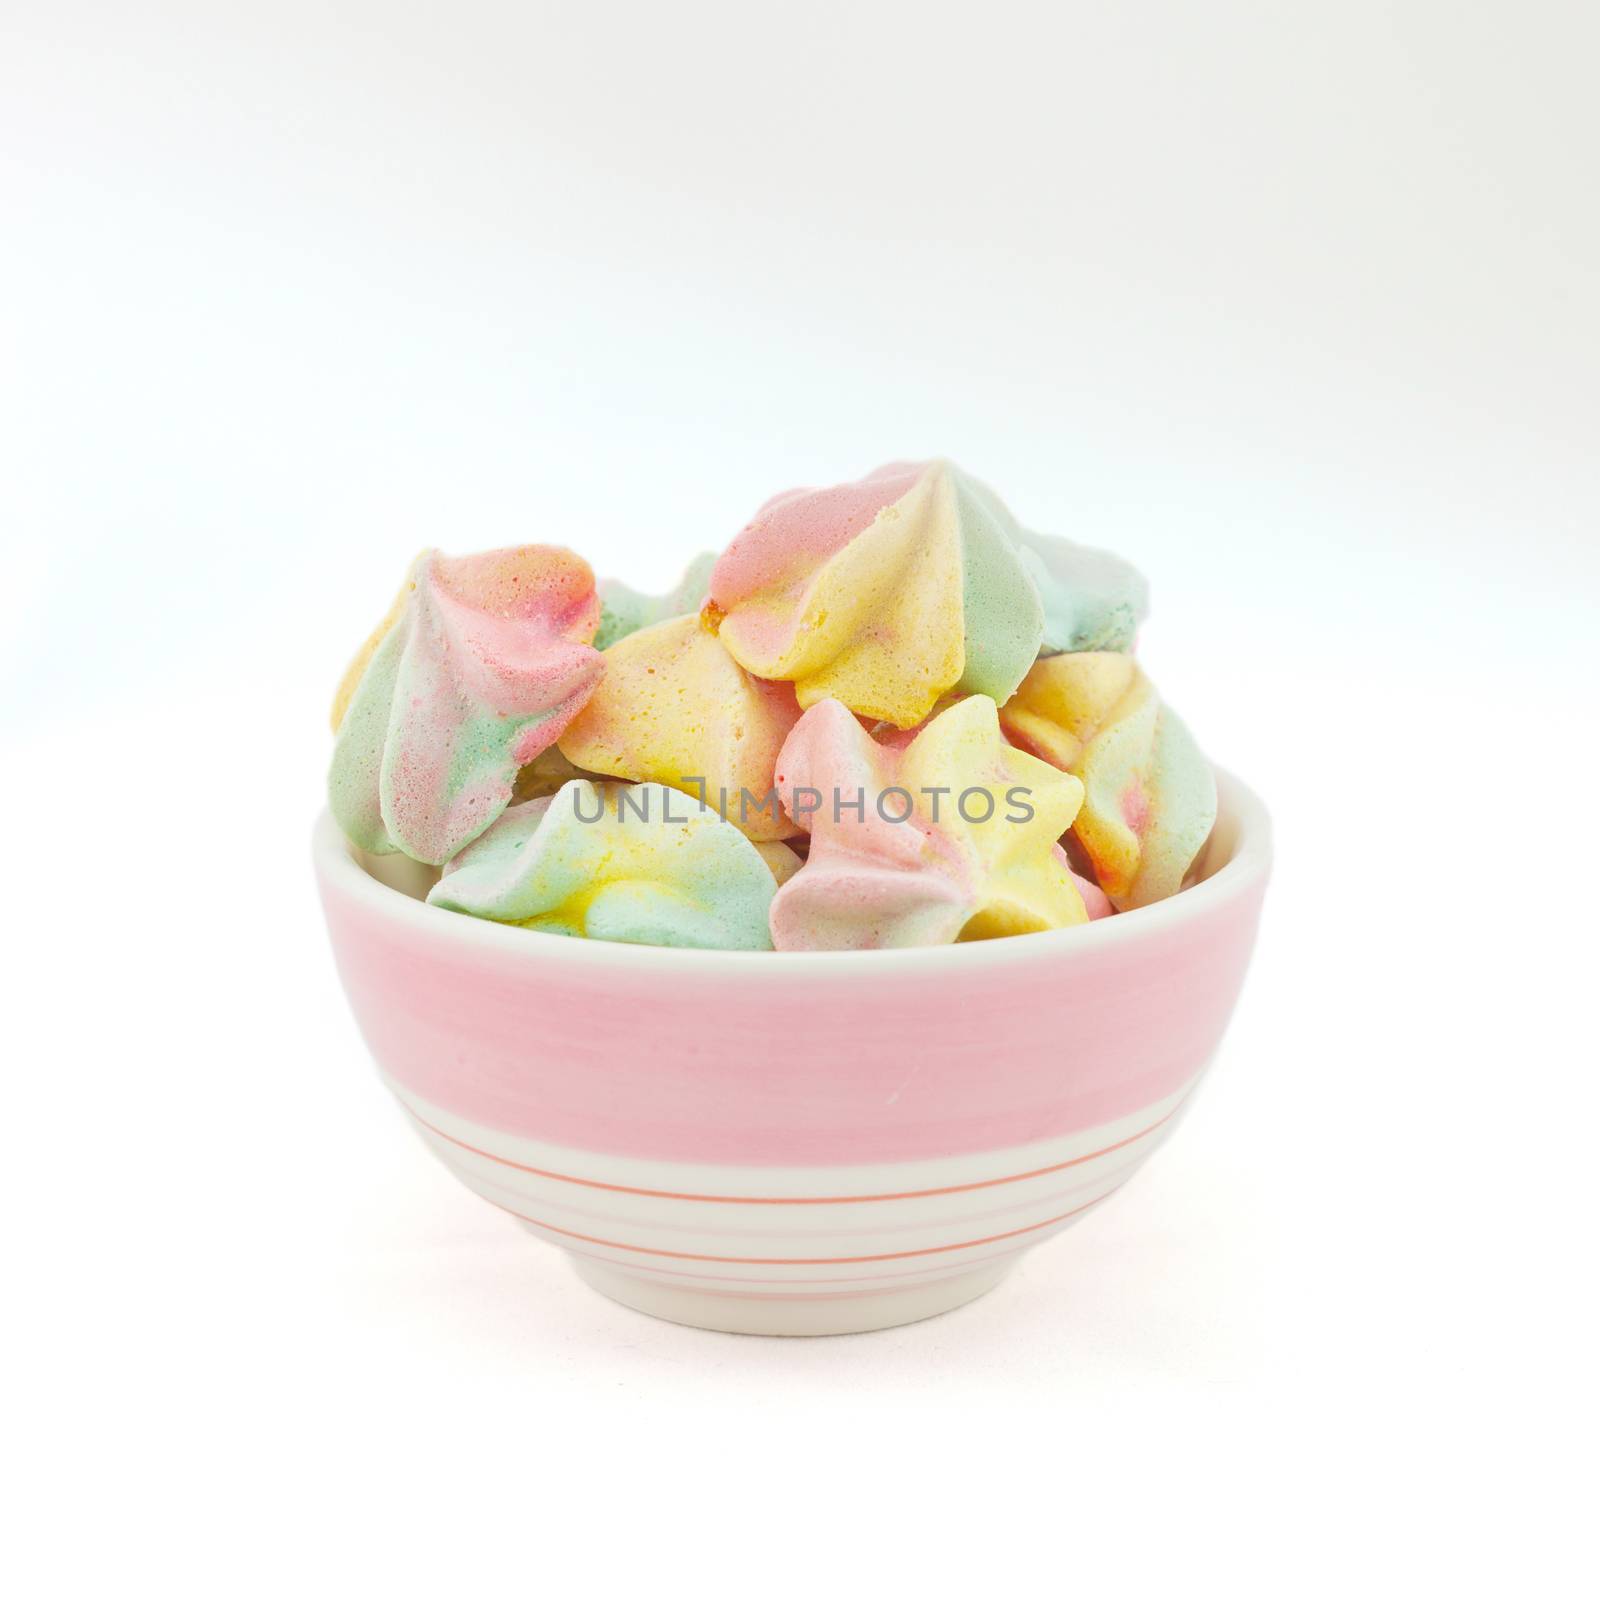 French rainbow meringue cookies on white background by nopparats